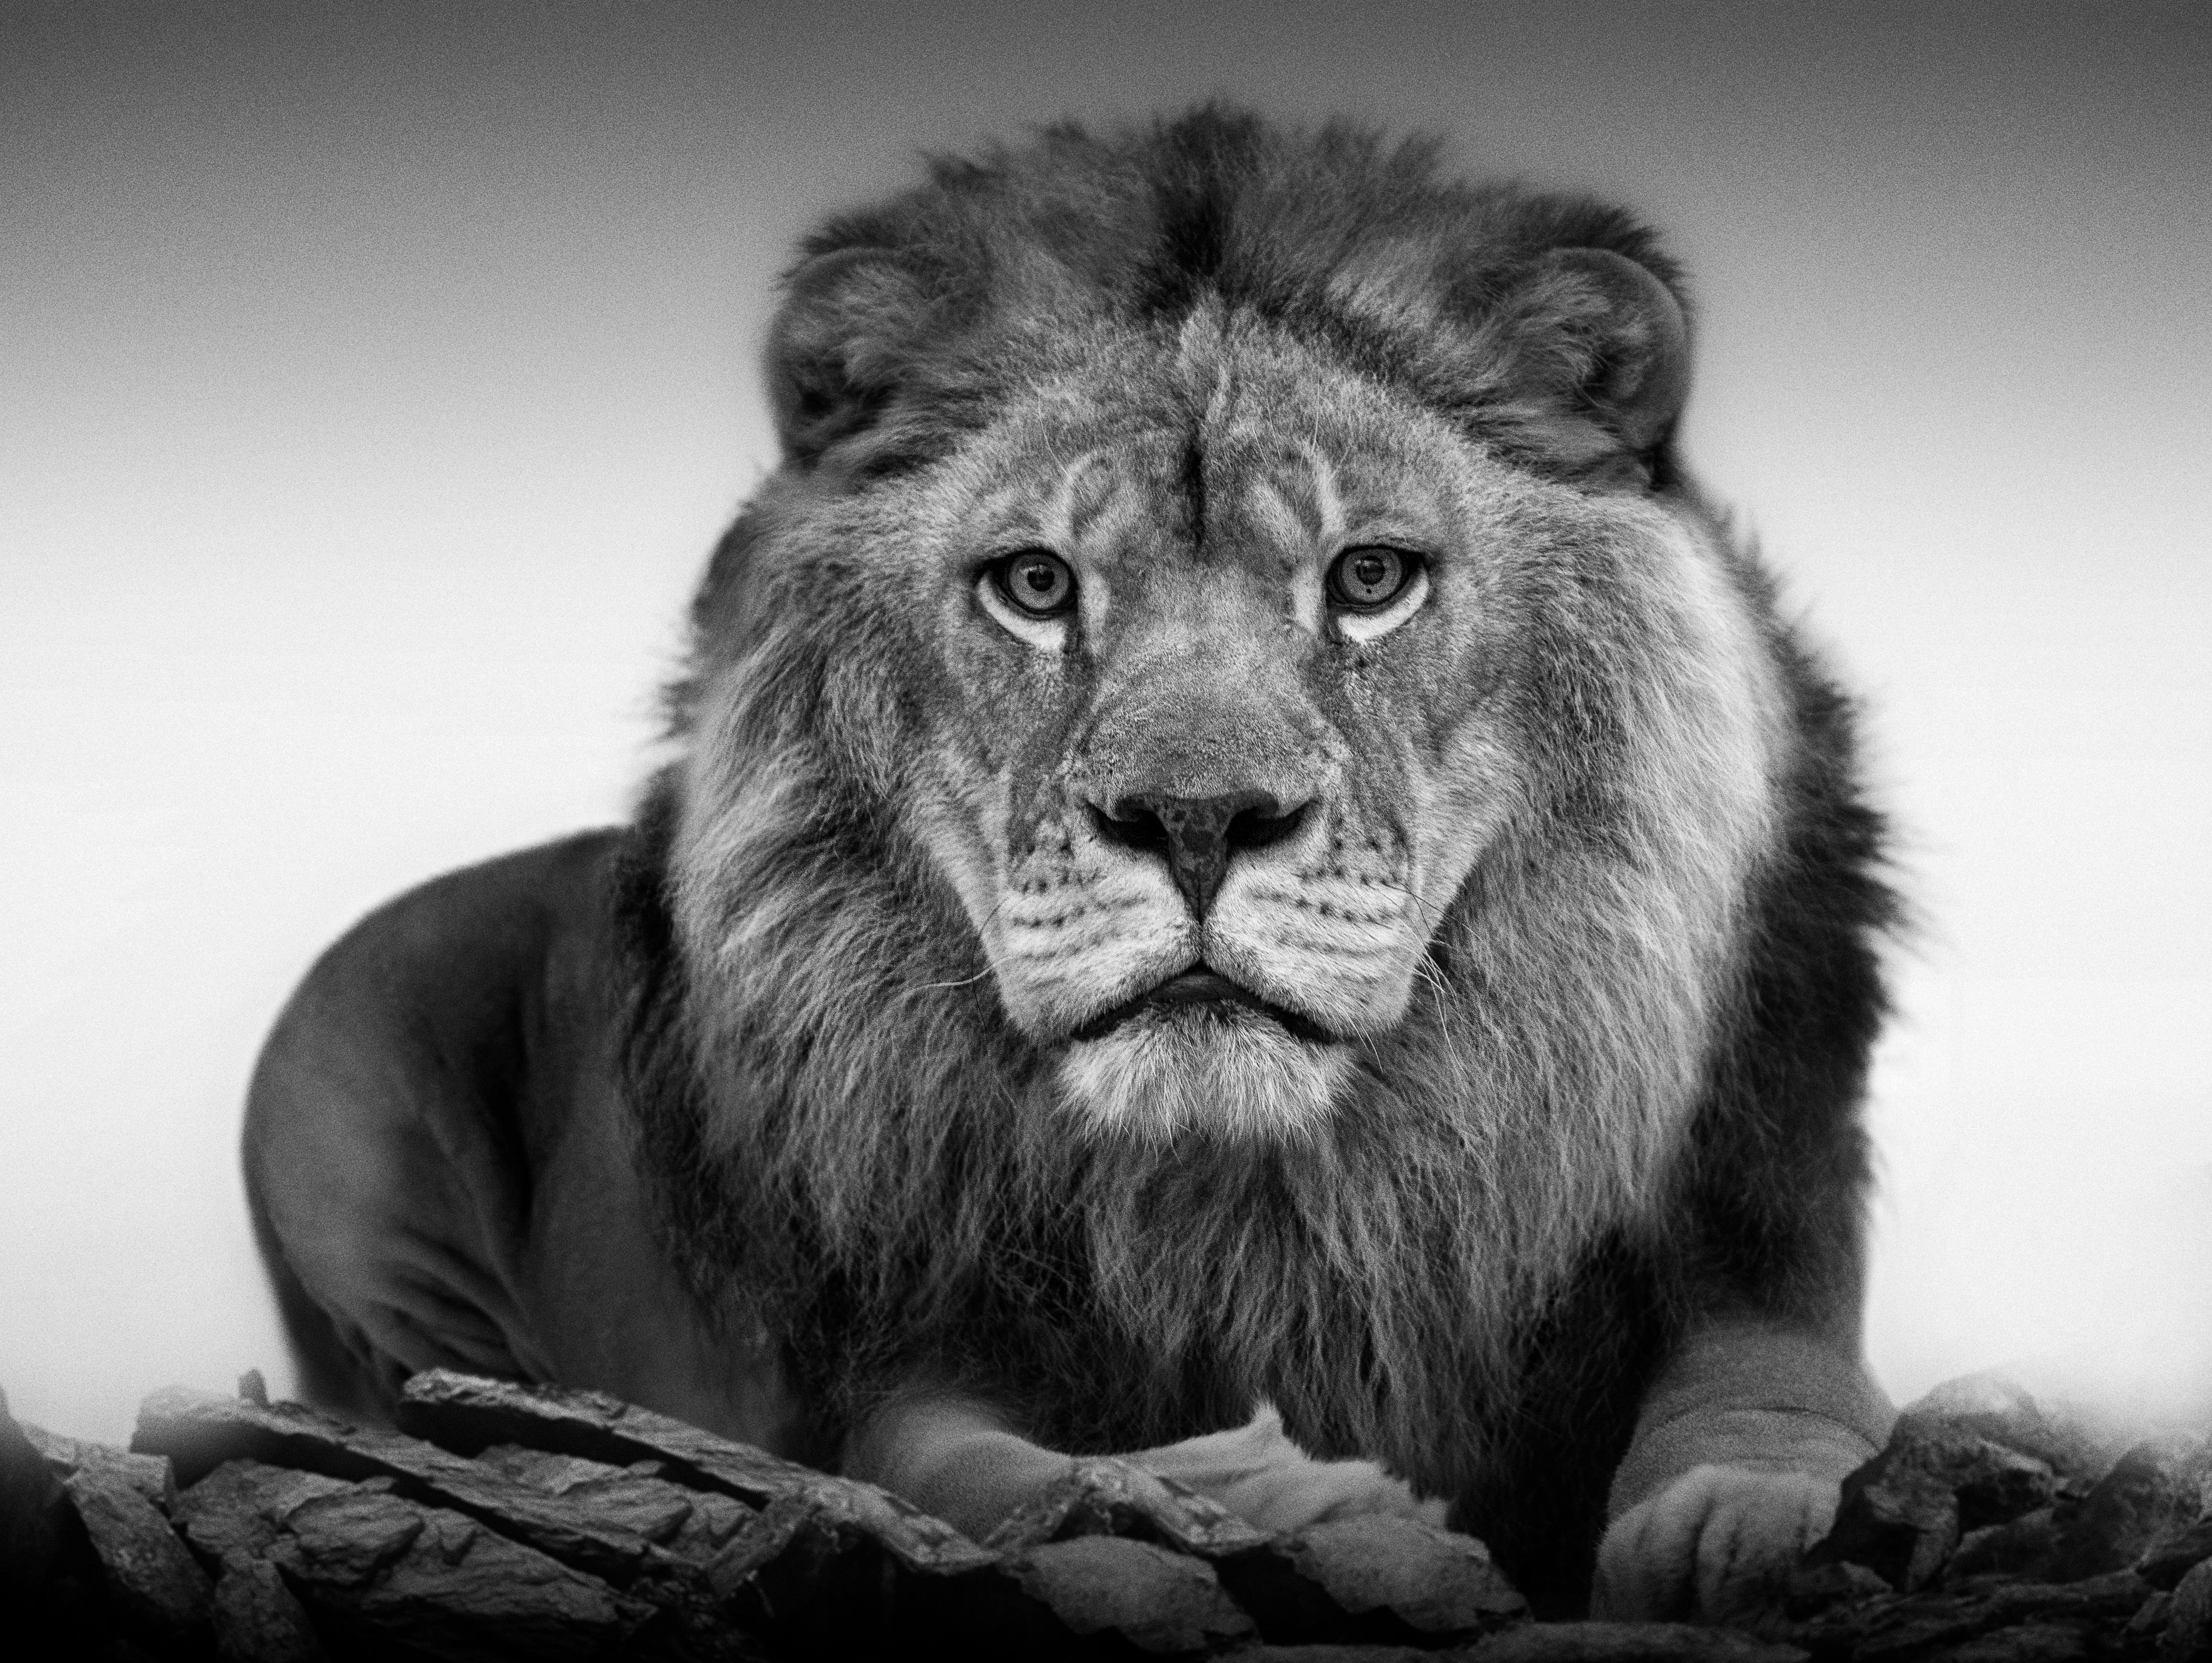 Shane Russeck Black and White Photograph - Lion Portrait - 36x48 Black & White Photography Unsigned Test Print